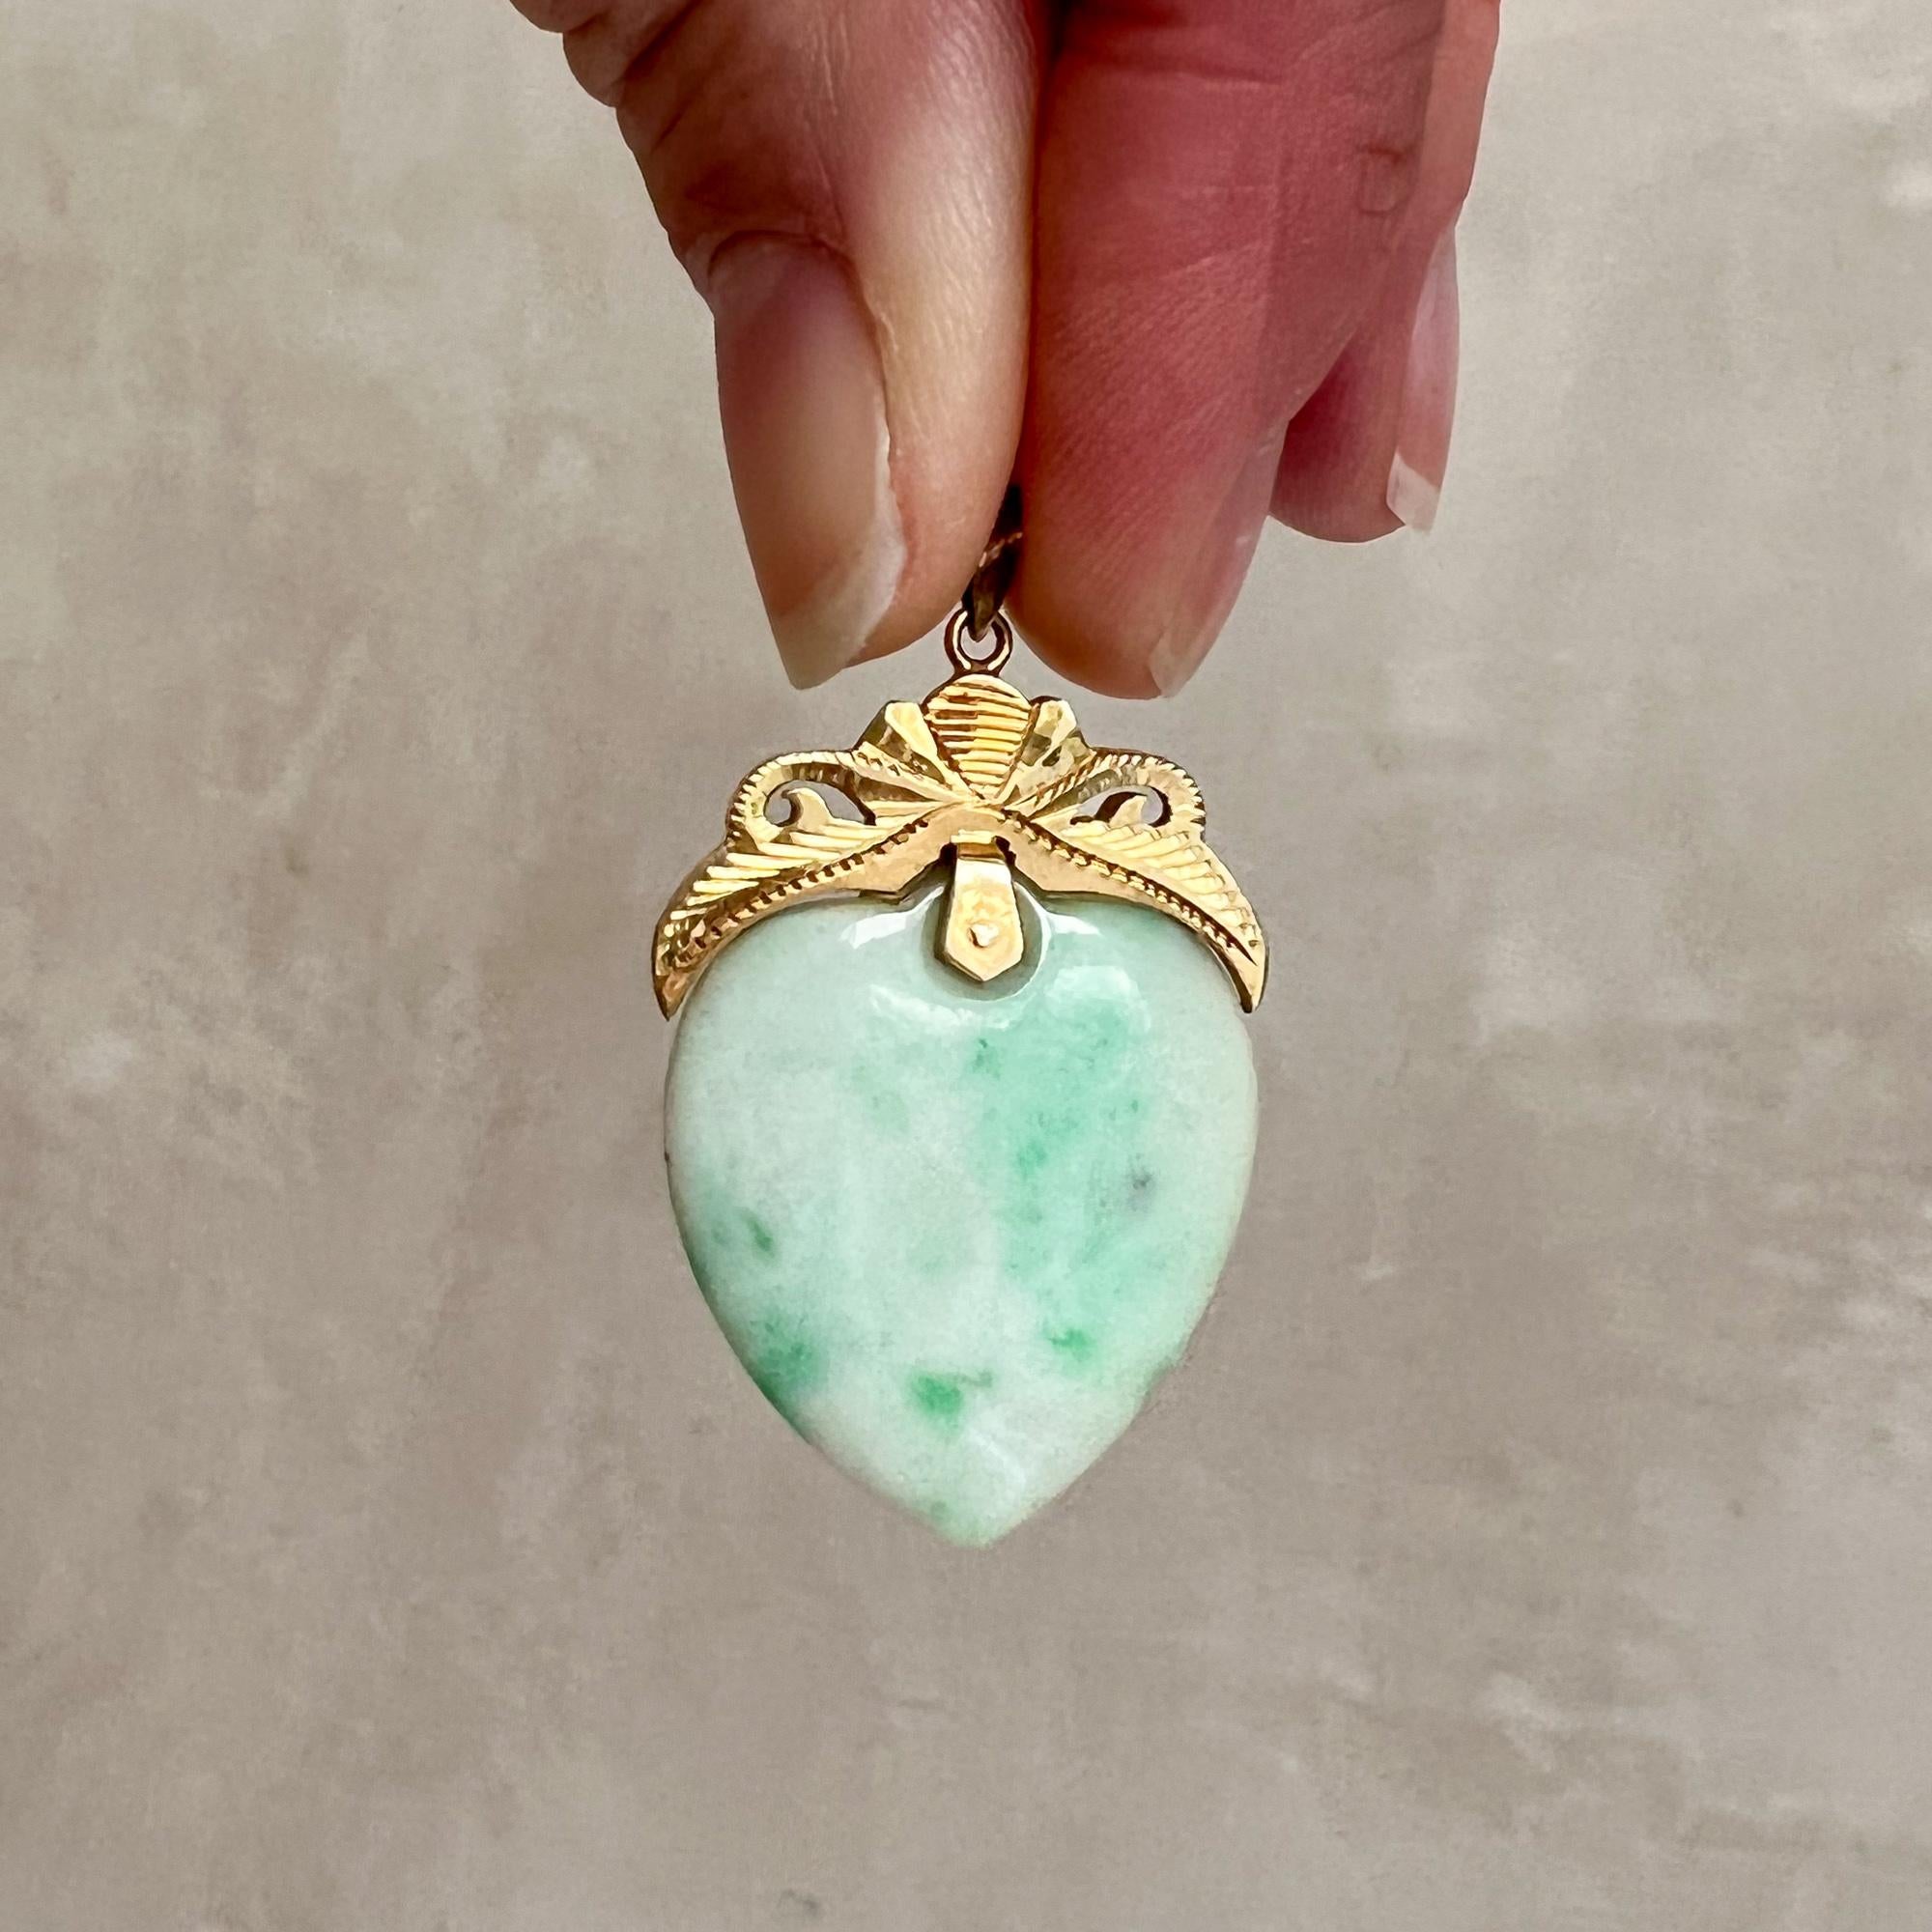 A nephrite jade heart pendant set with a 14 karat gold bail. The jade has a mottled and marbled white and green color, the opaque jade stone is beautifully polished and of high quality. The decorated gold frame above the jade heart is beautifully